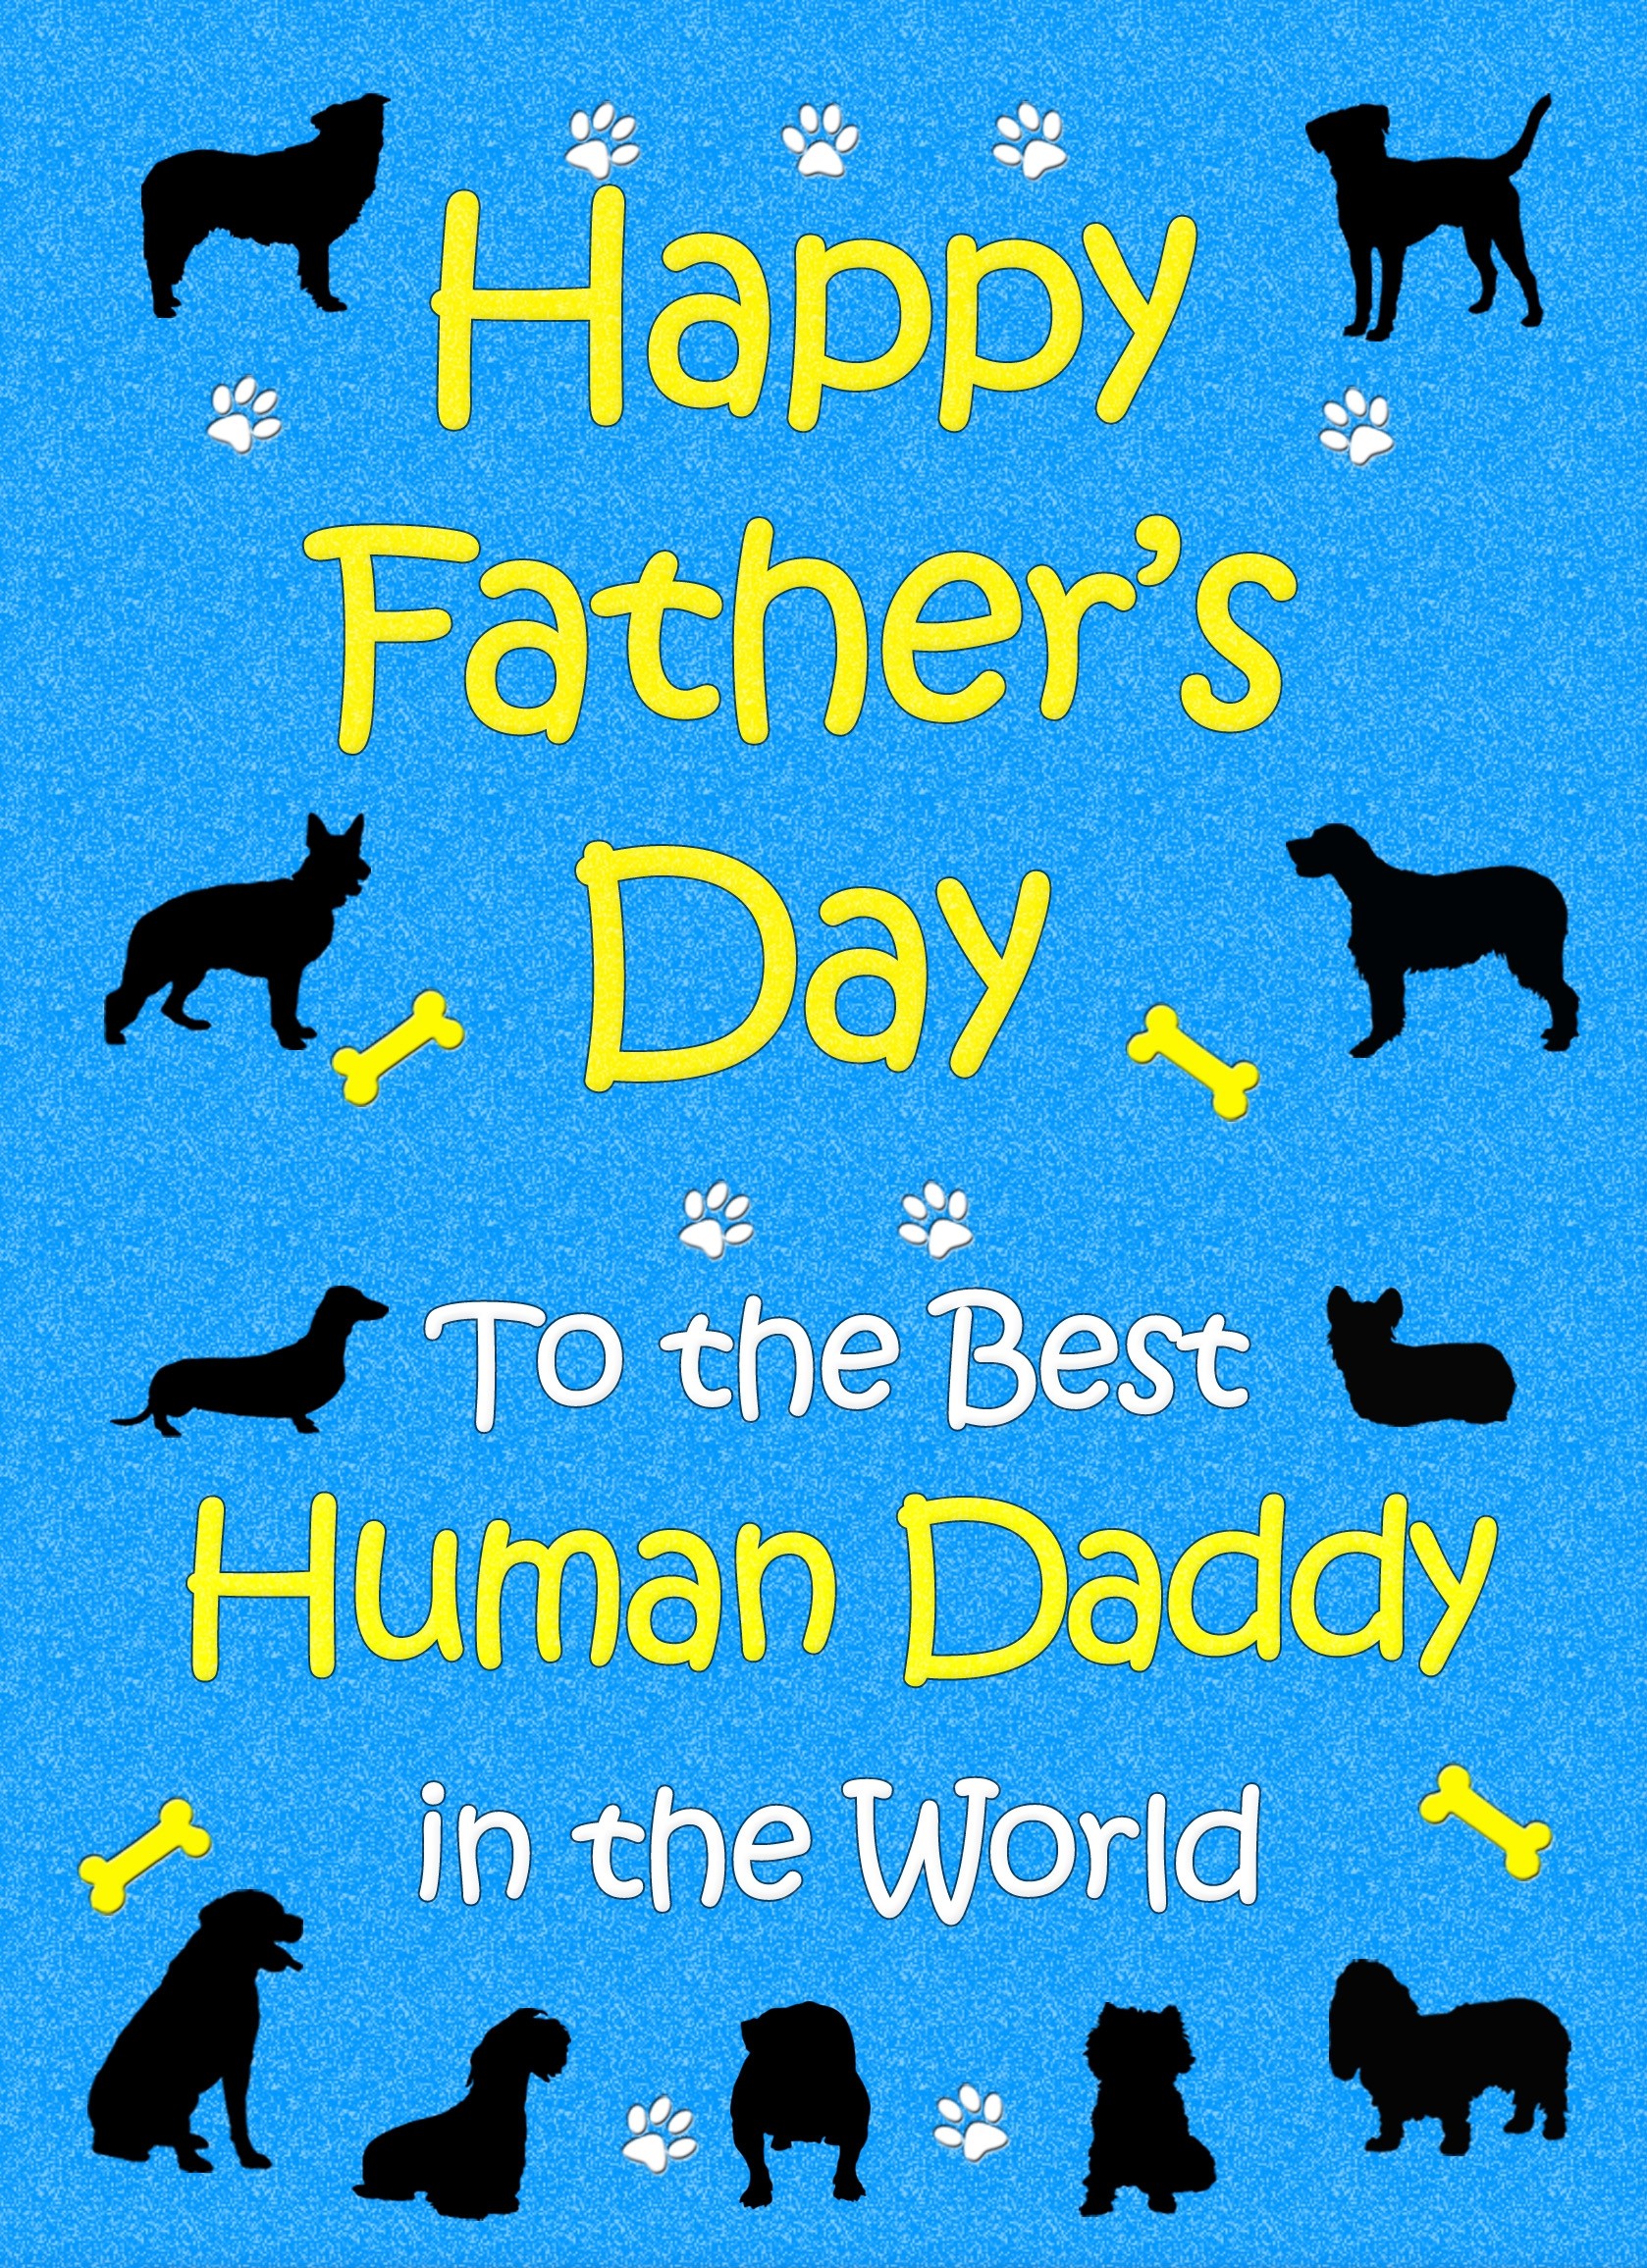 From The Dog Fathers Day Card (Blue, Human Daddy)